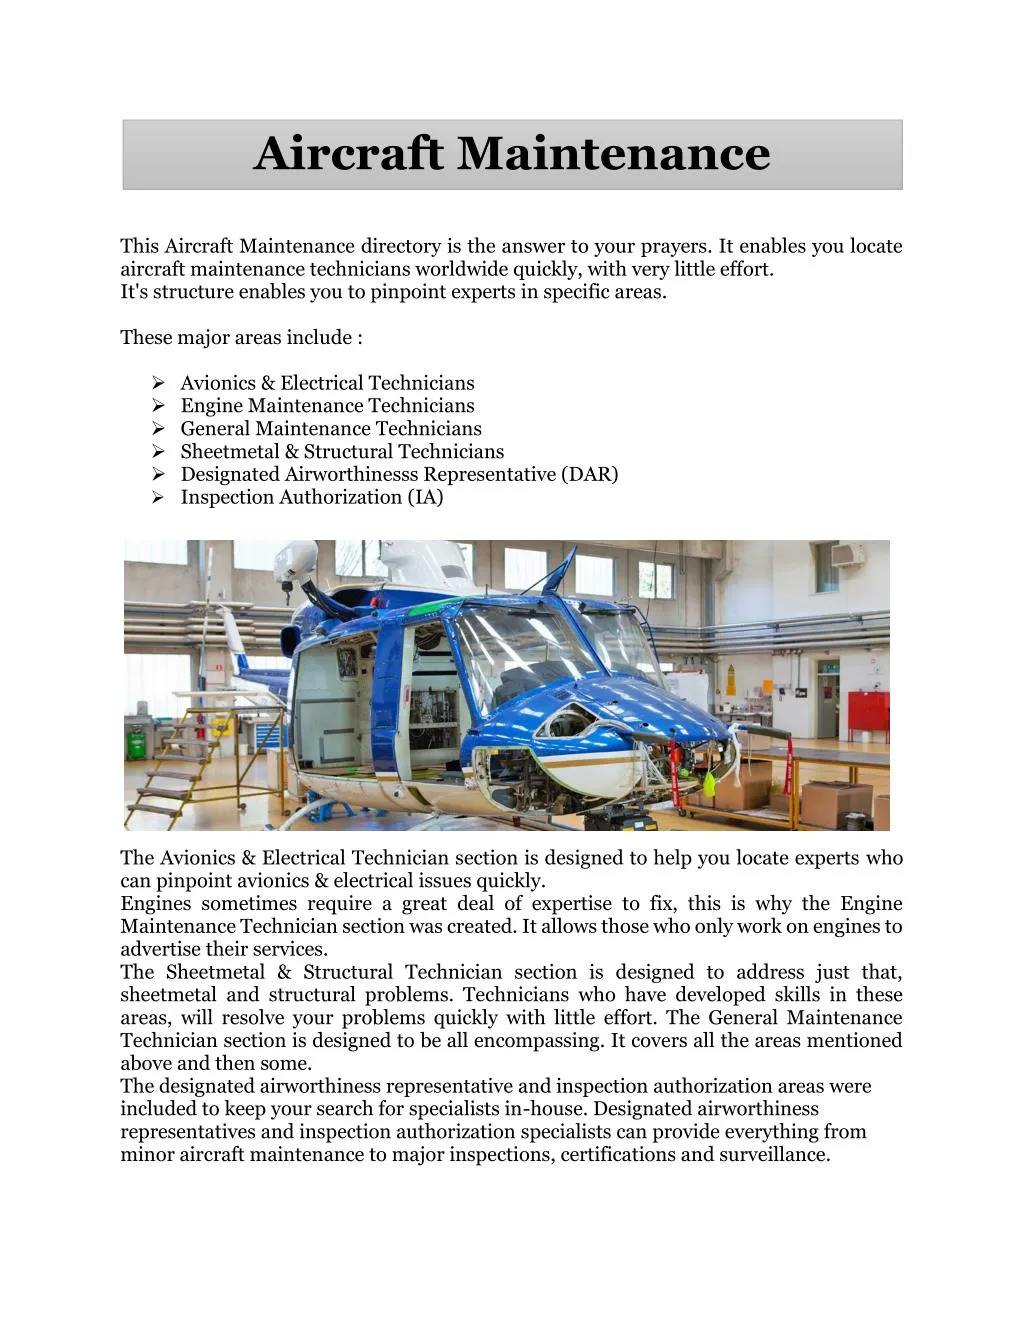 this aircraft maintenance directory is the answer